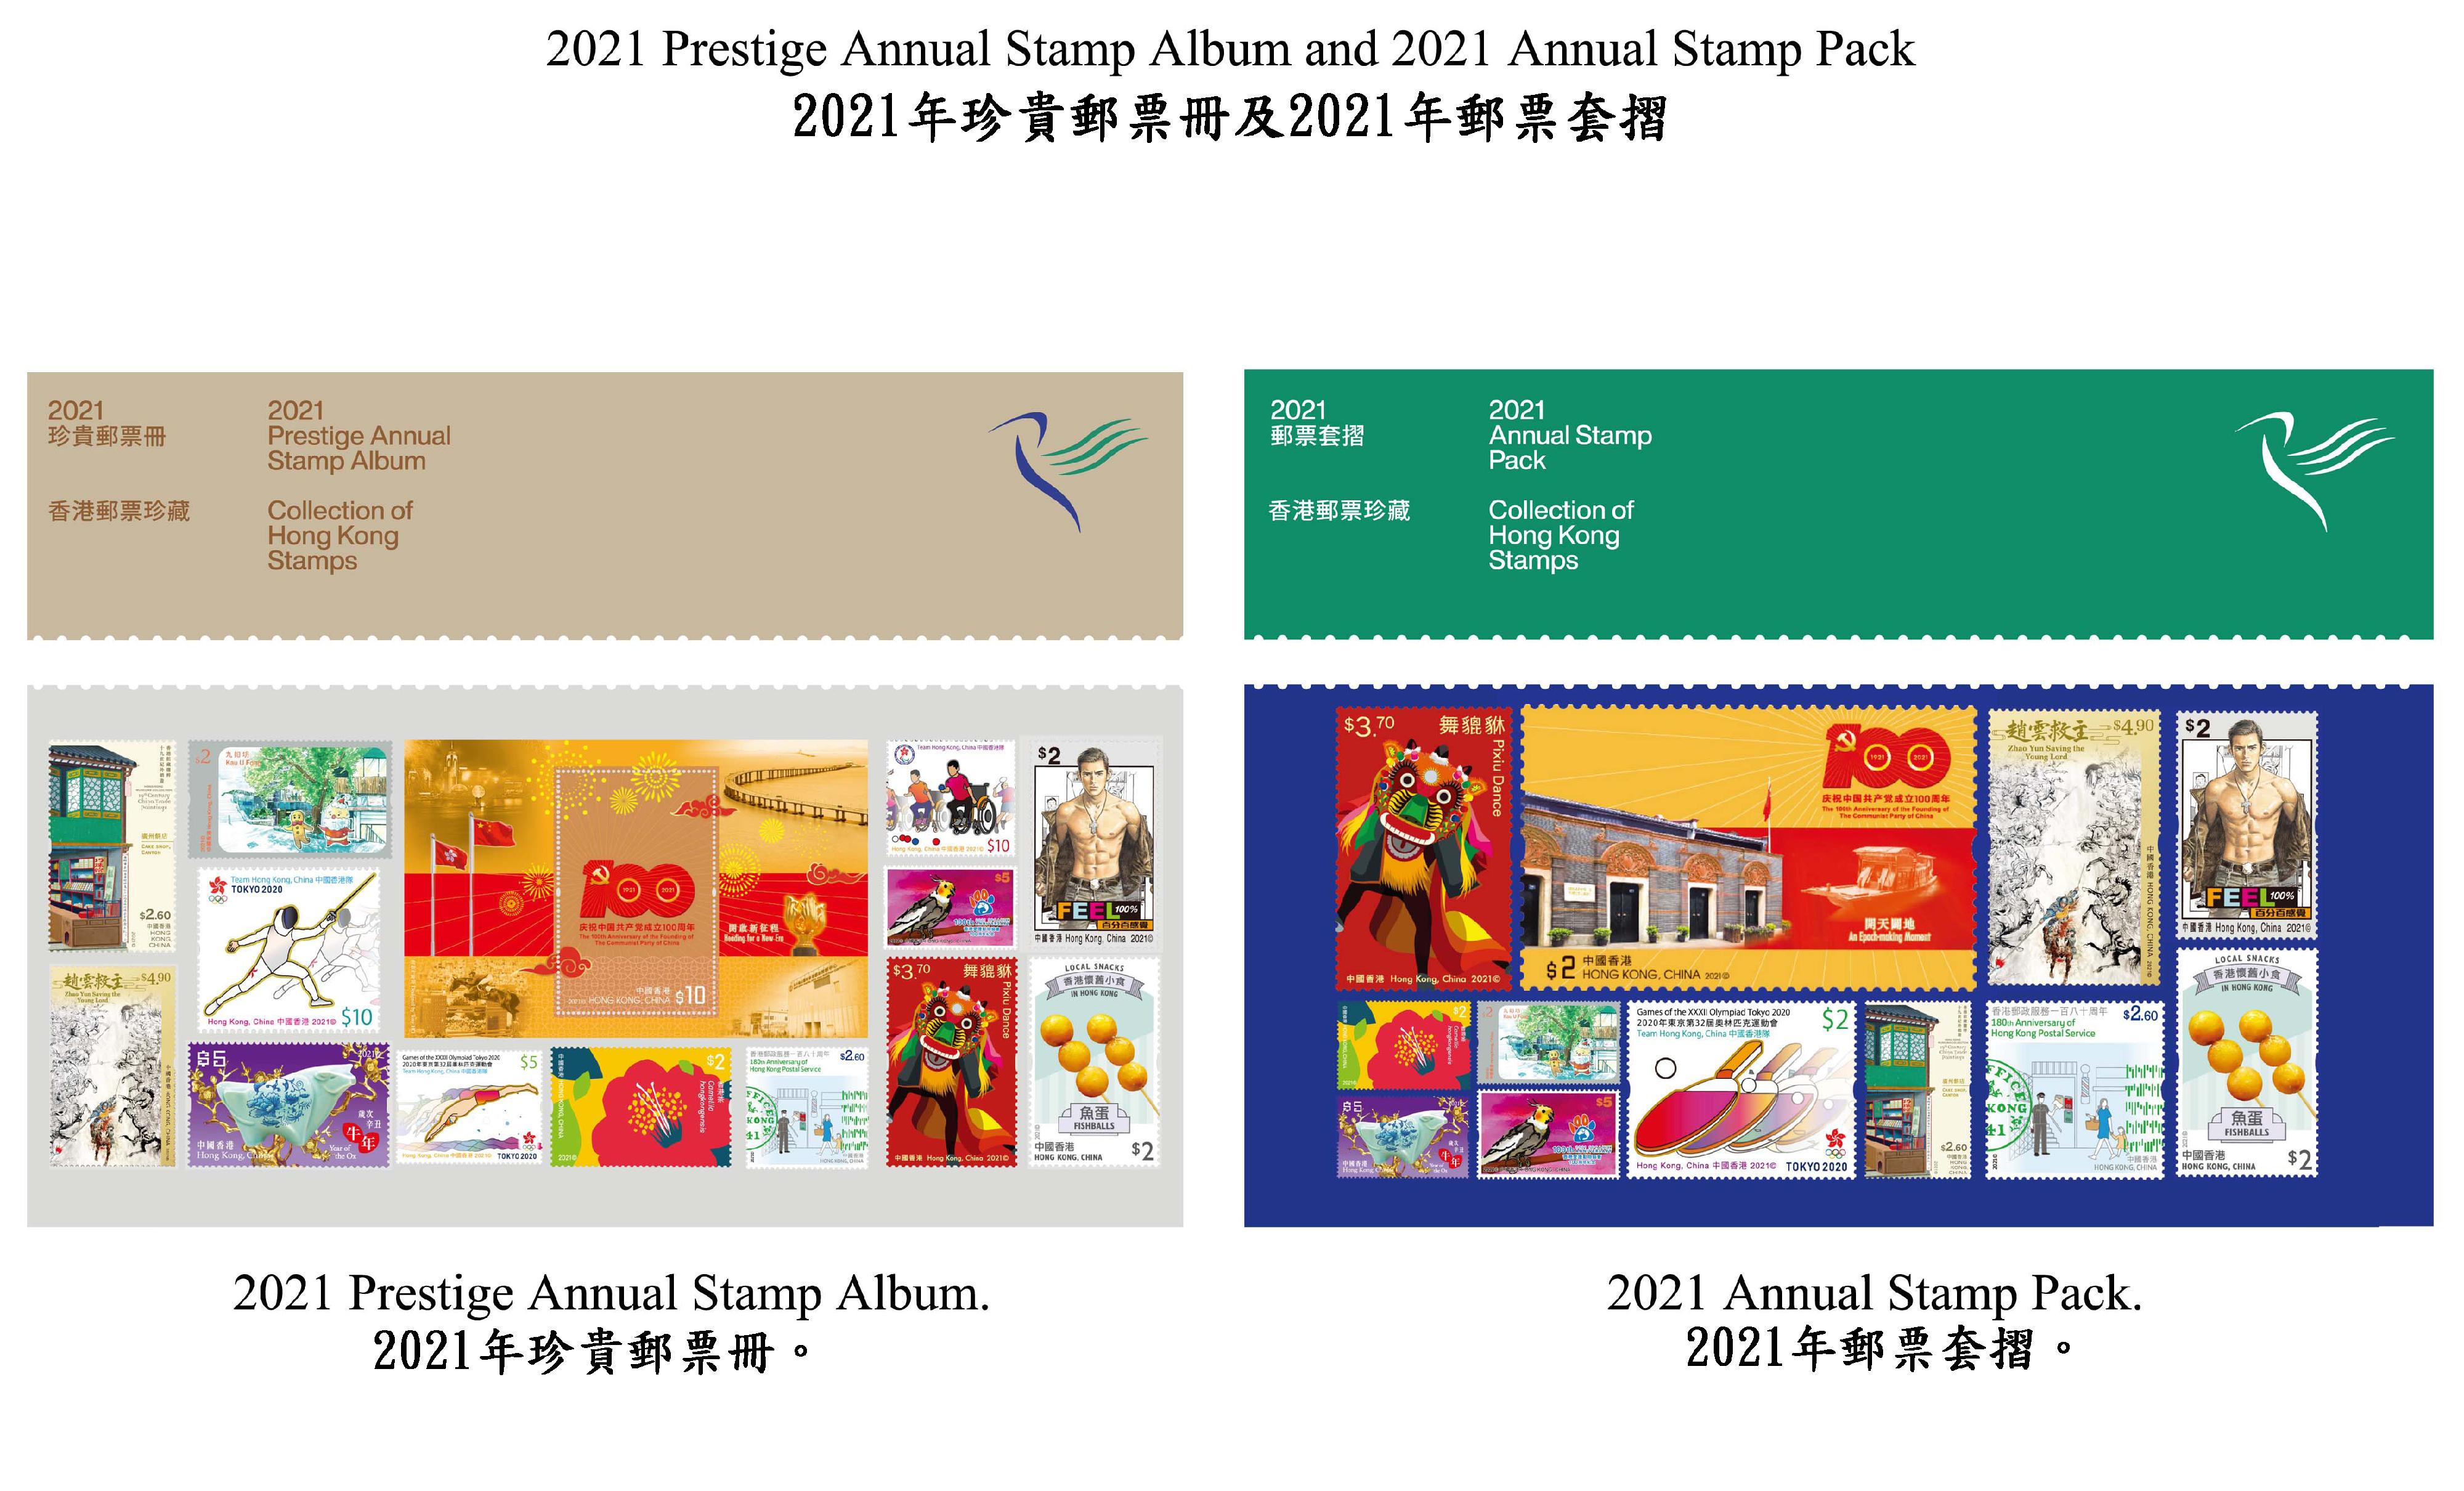 Hongkong Post will launch the 2021 Prestige Annual Stamp Album and the 2021 Annual Stamp Pack on March 31 (Thursday). Photo shows the 2021 Prestige Annual Stamp Album and the 2021 Annual Stamp Pack.